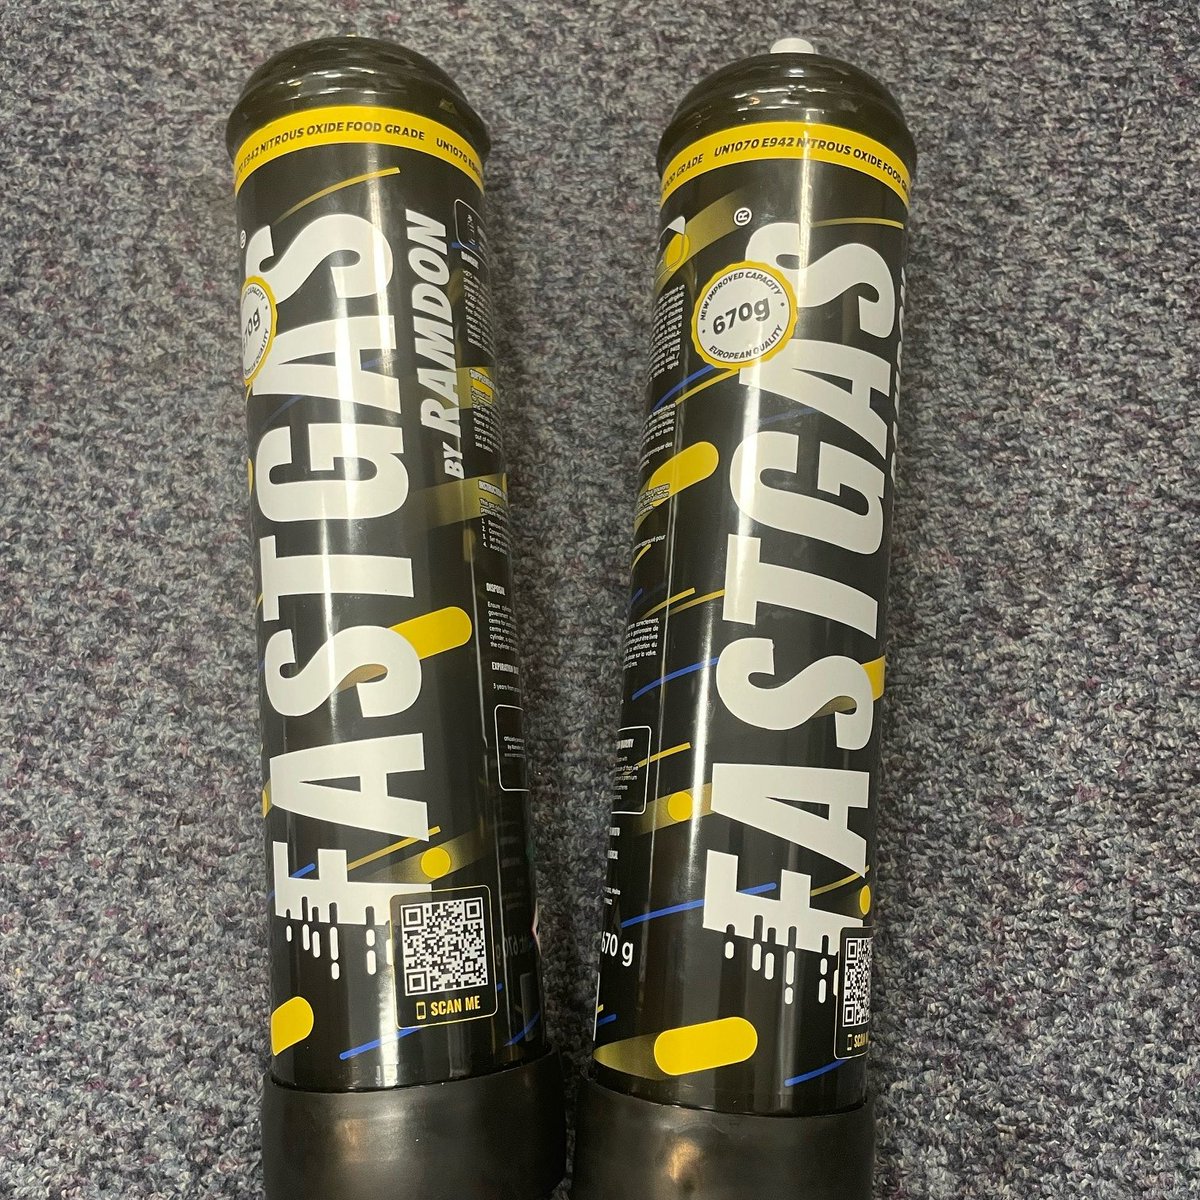 Yesterday officers came across a male in possession of two large canisters of Nitrous Oxide by Poplar All Saints Church. These were seized and the male issued with a Community Resolution.